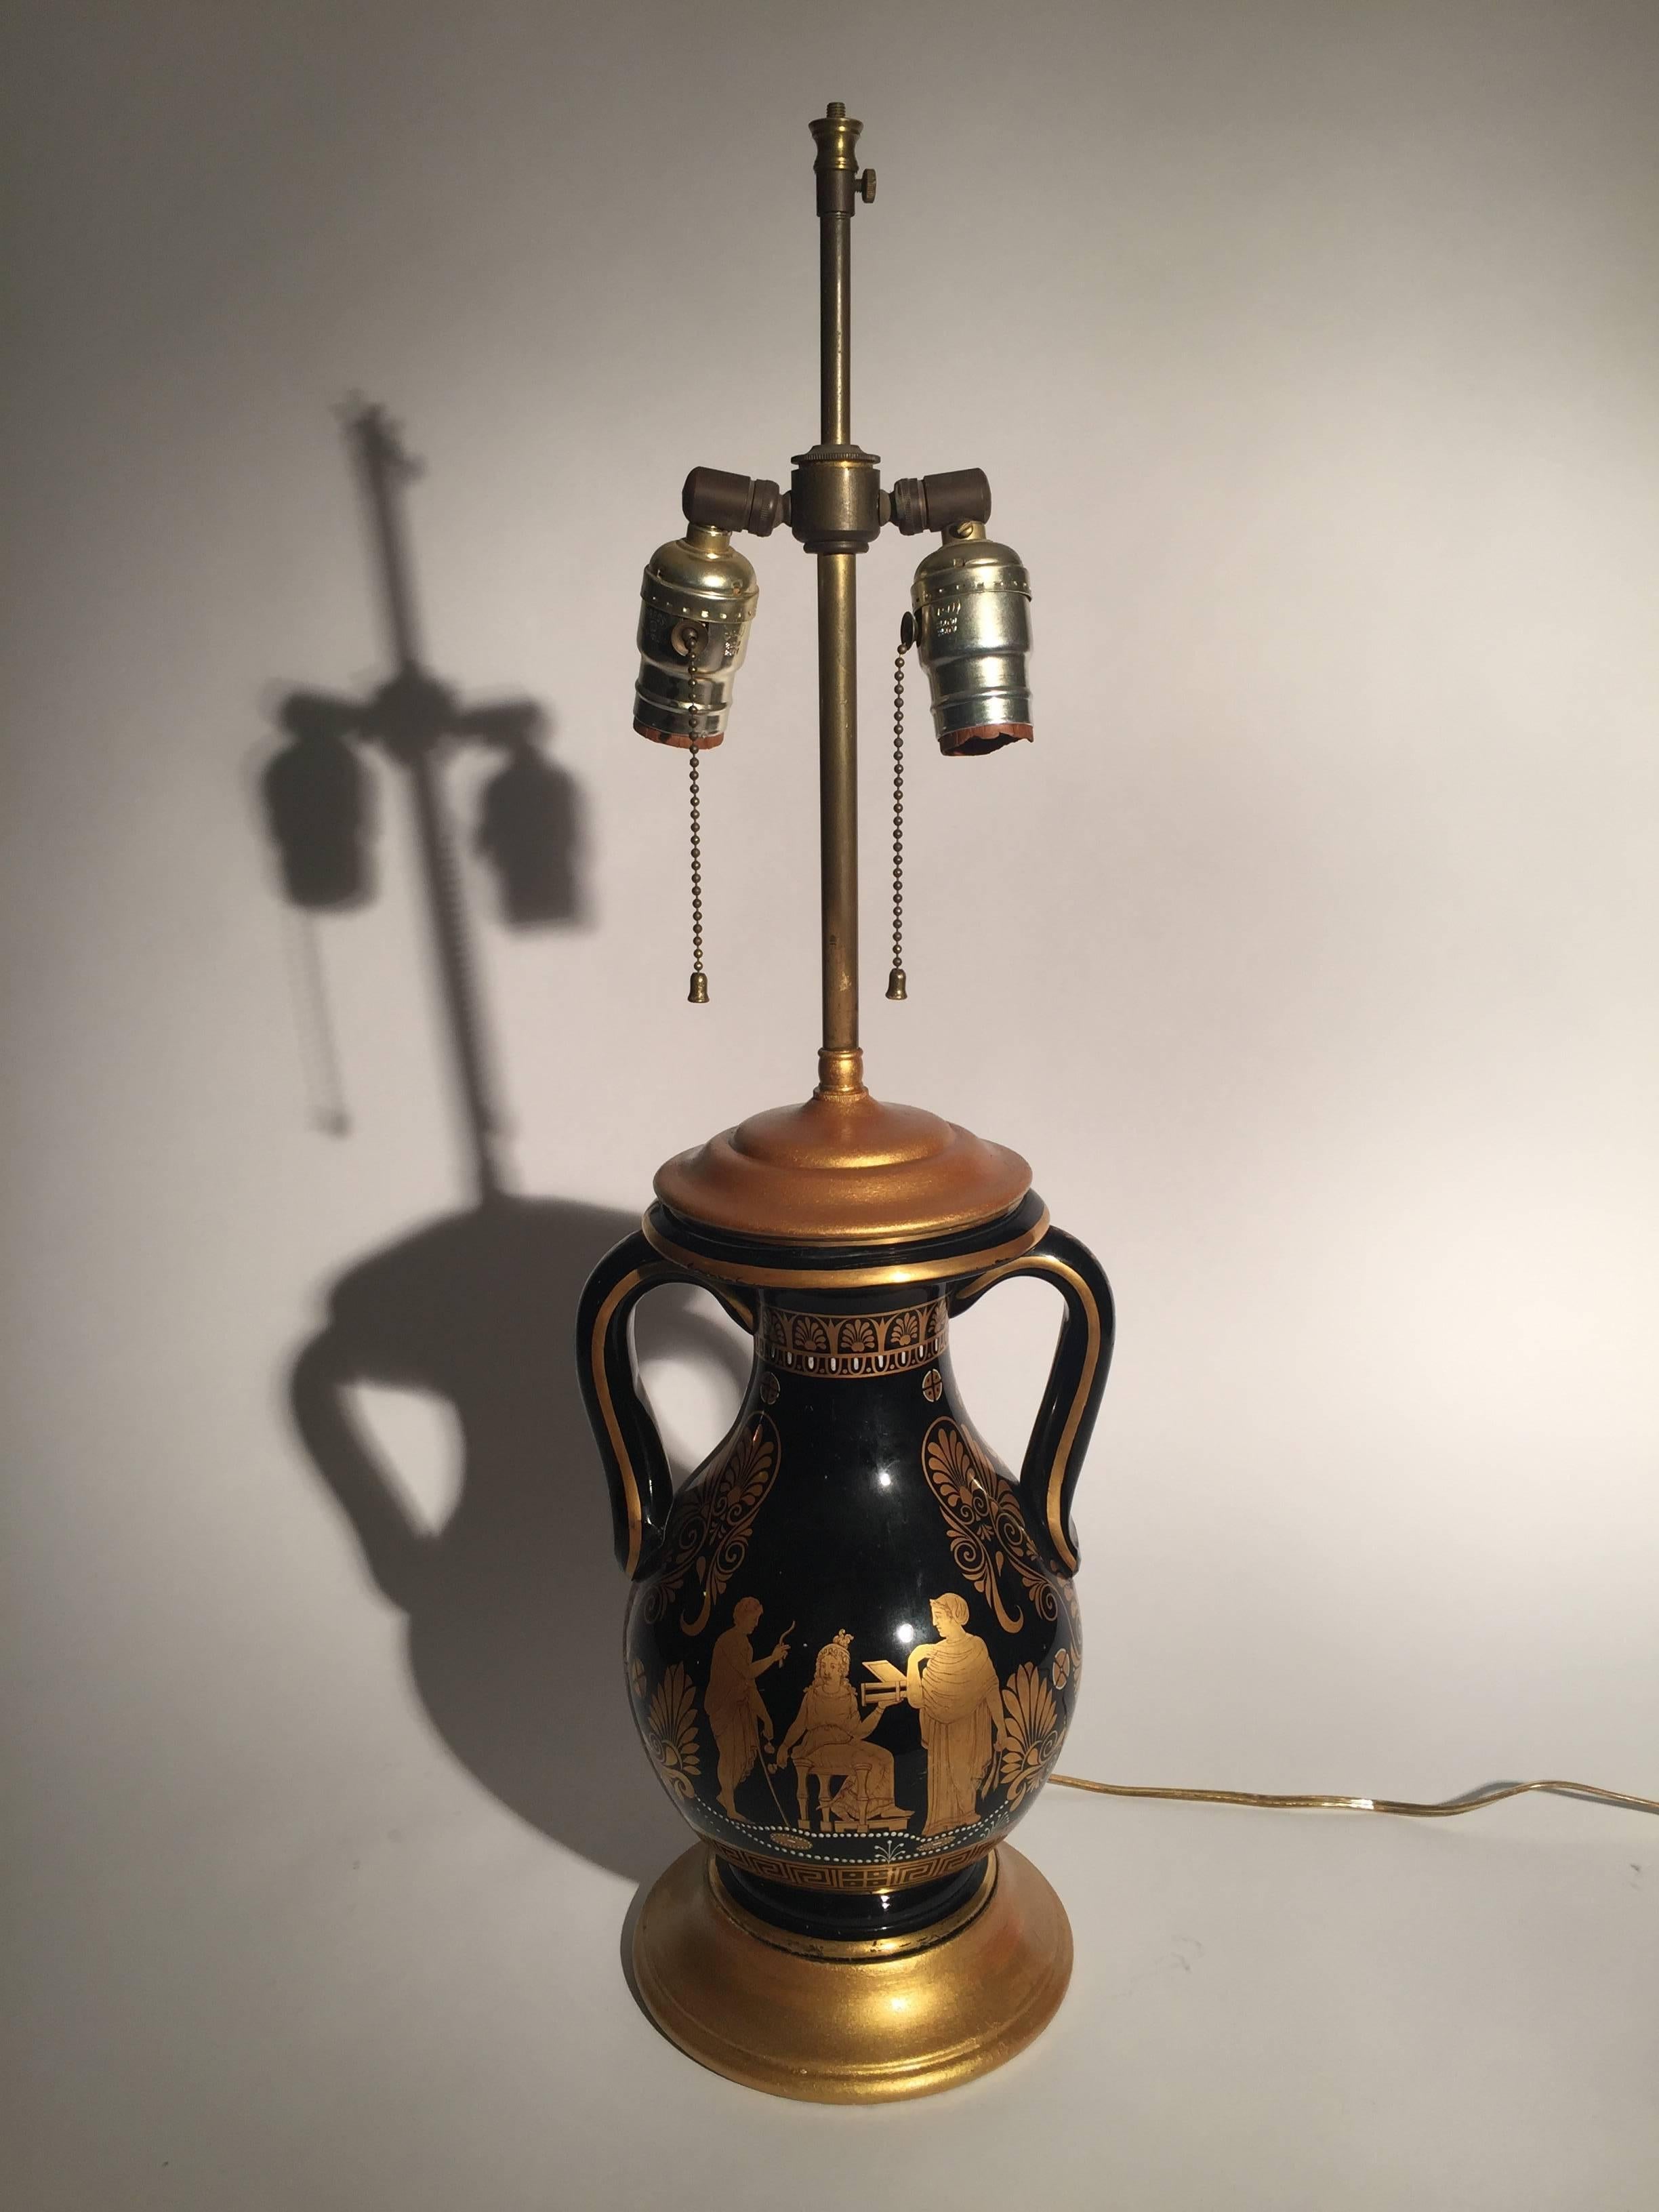 A pair of rare back and gold Greek revival handled urn lamps with gilt decoration. The bodies with draped Greek figures and Greek key and hand applied white bead decoration. The double sockets with an adjustable shade height. The shades are for